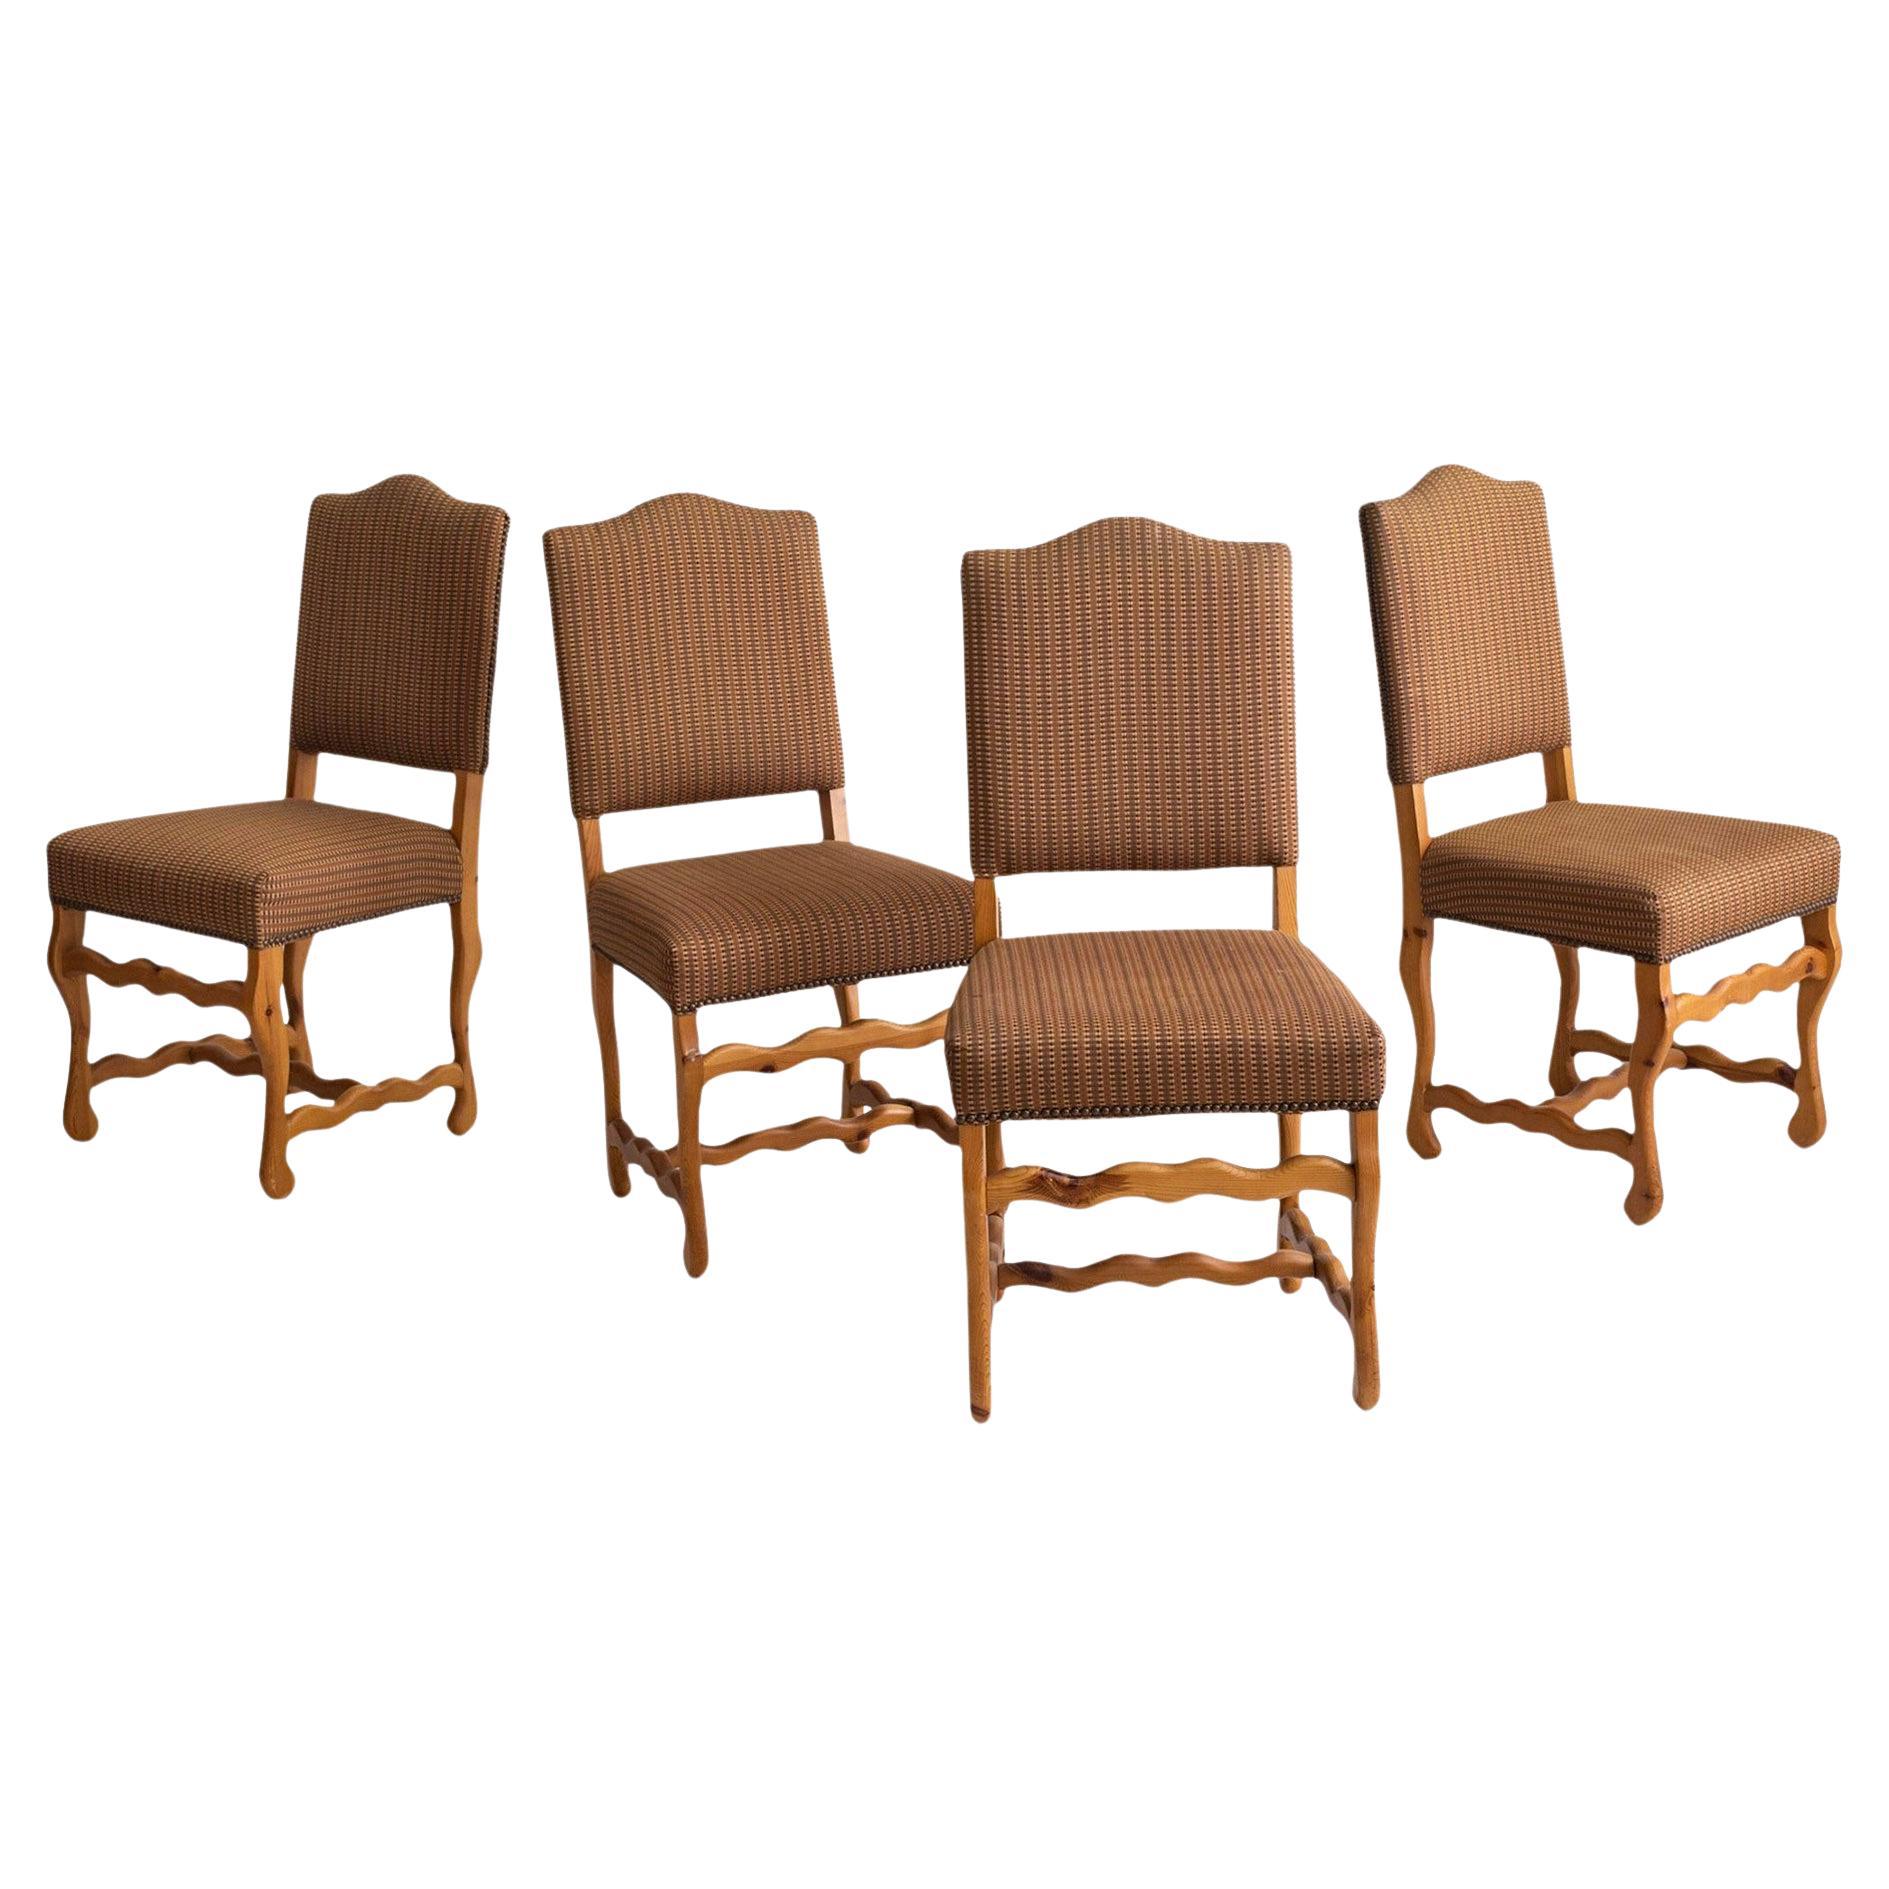 Post Modern 'Squiggle' Form Knotty Pine Dining Chairs - A Set of 4 For Sale